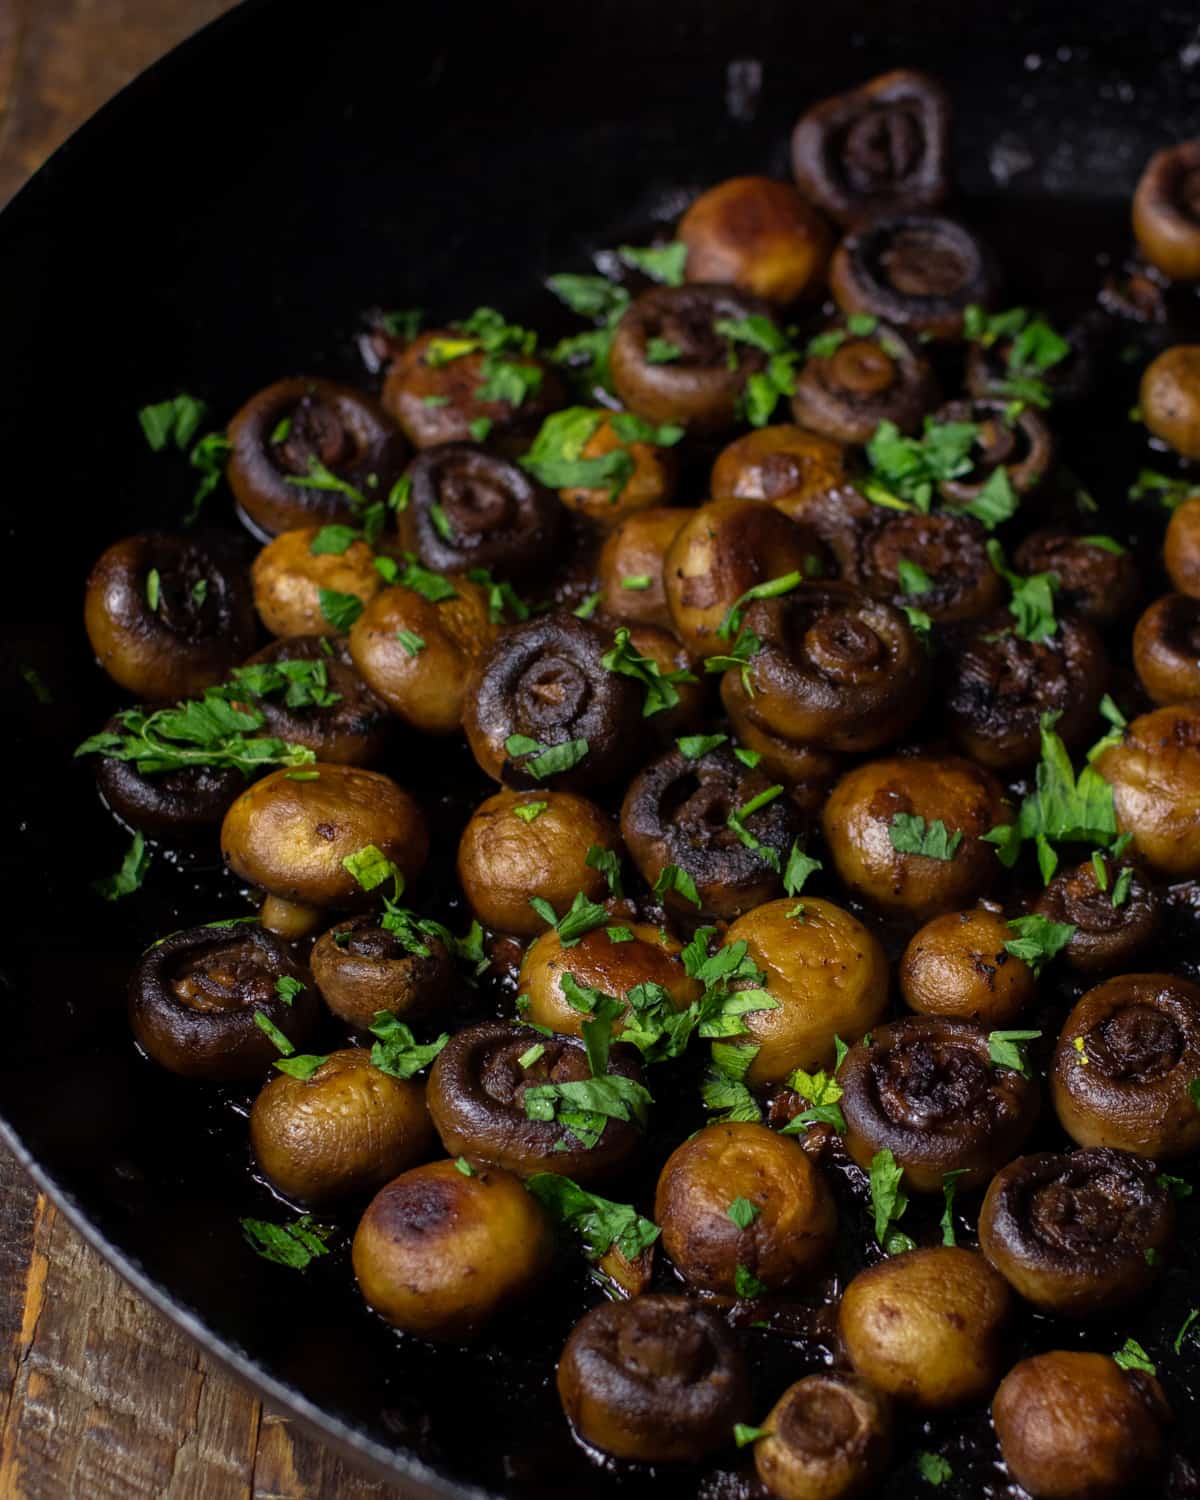 Overhead picture of cooked mushrooms sprinkled with parsley.